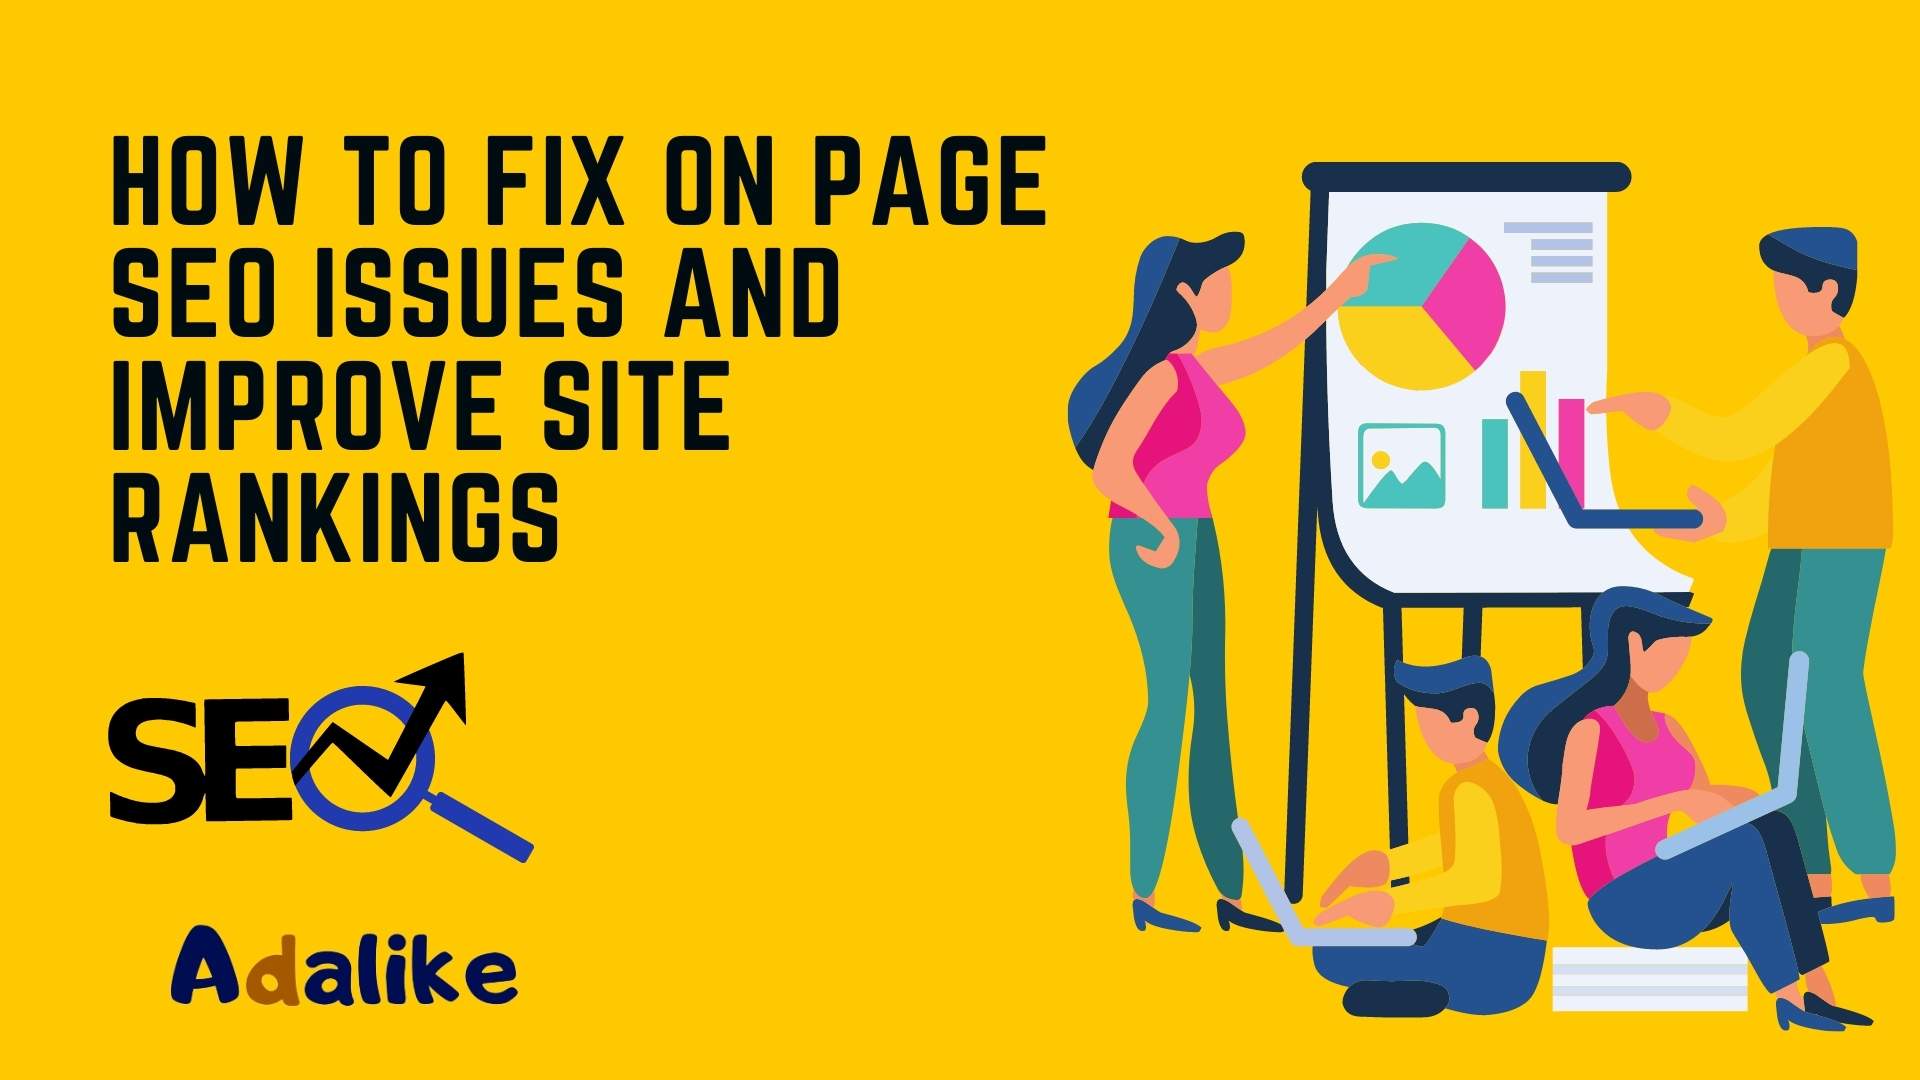 How To Fix On Page SEO Issues And Improve Site Rankings